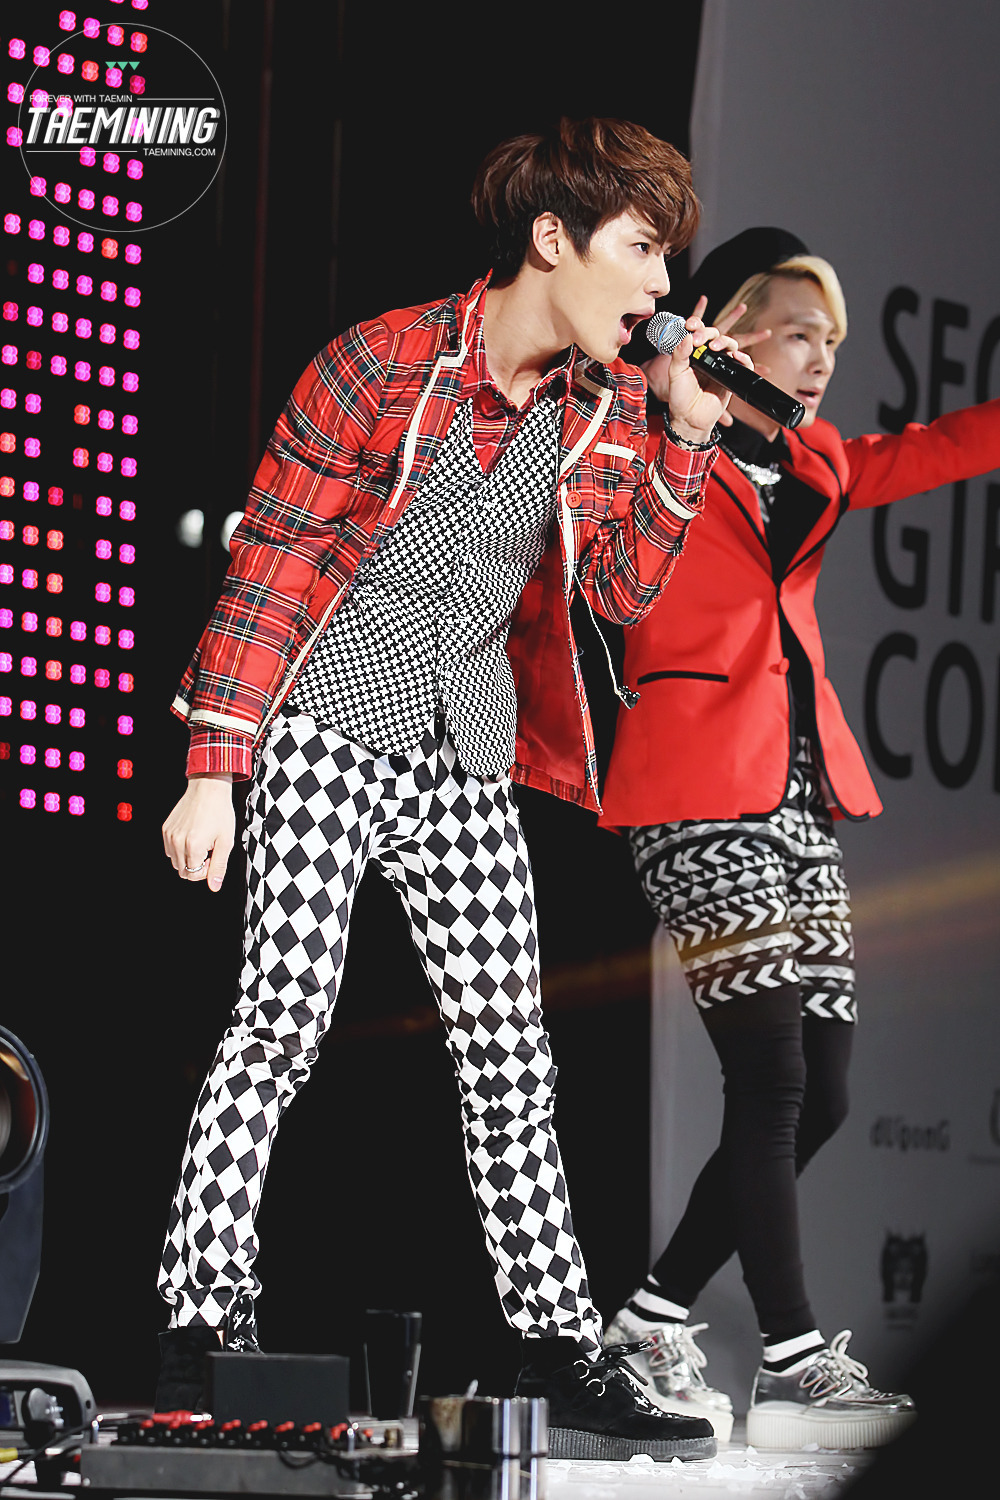 130406 SHINee @ Seoul Girls Collection 2013 event Tumblr_mkvs6phpjv1rsfd76o1_1280